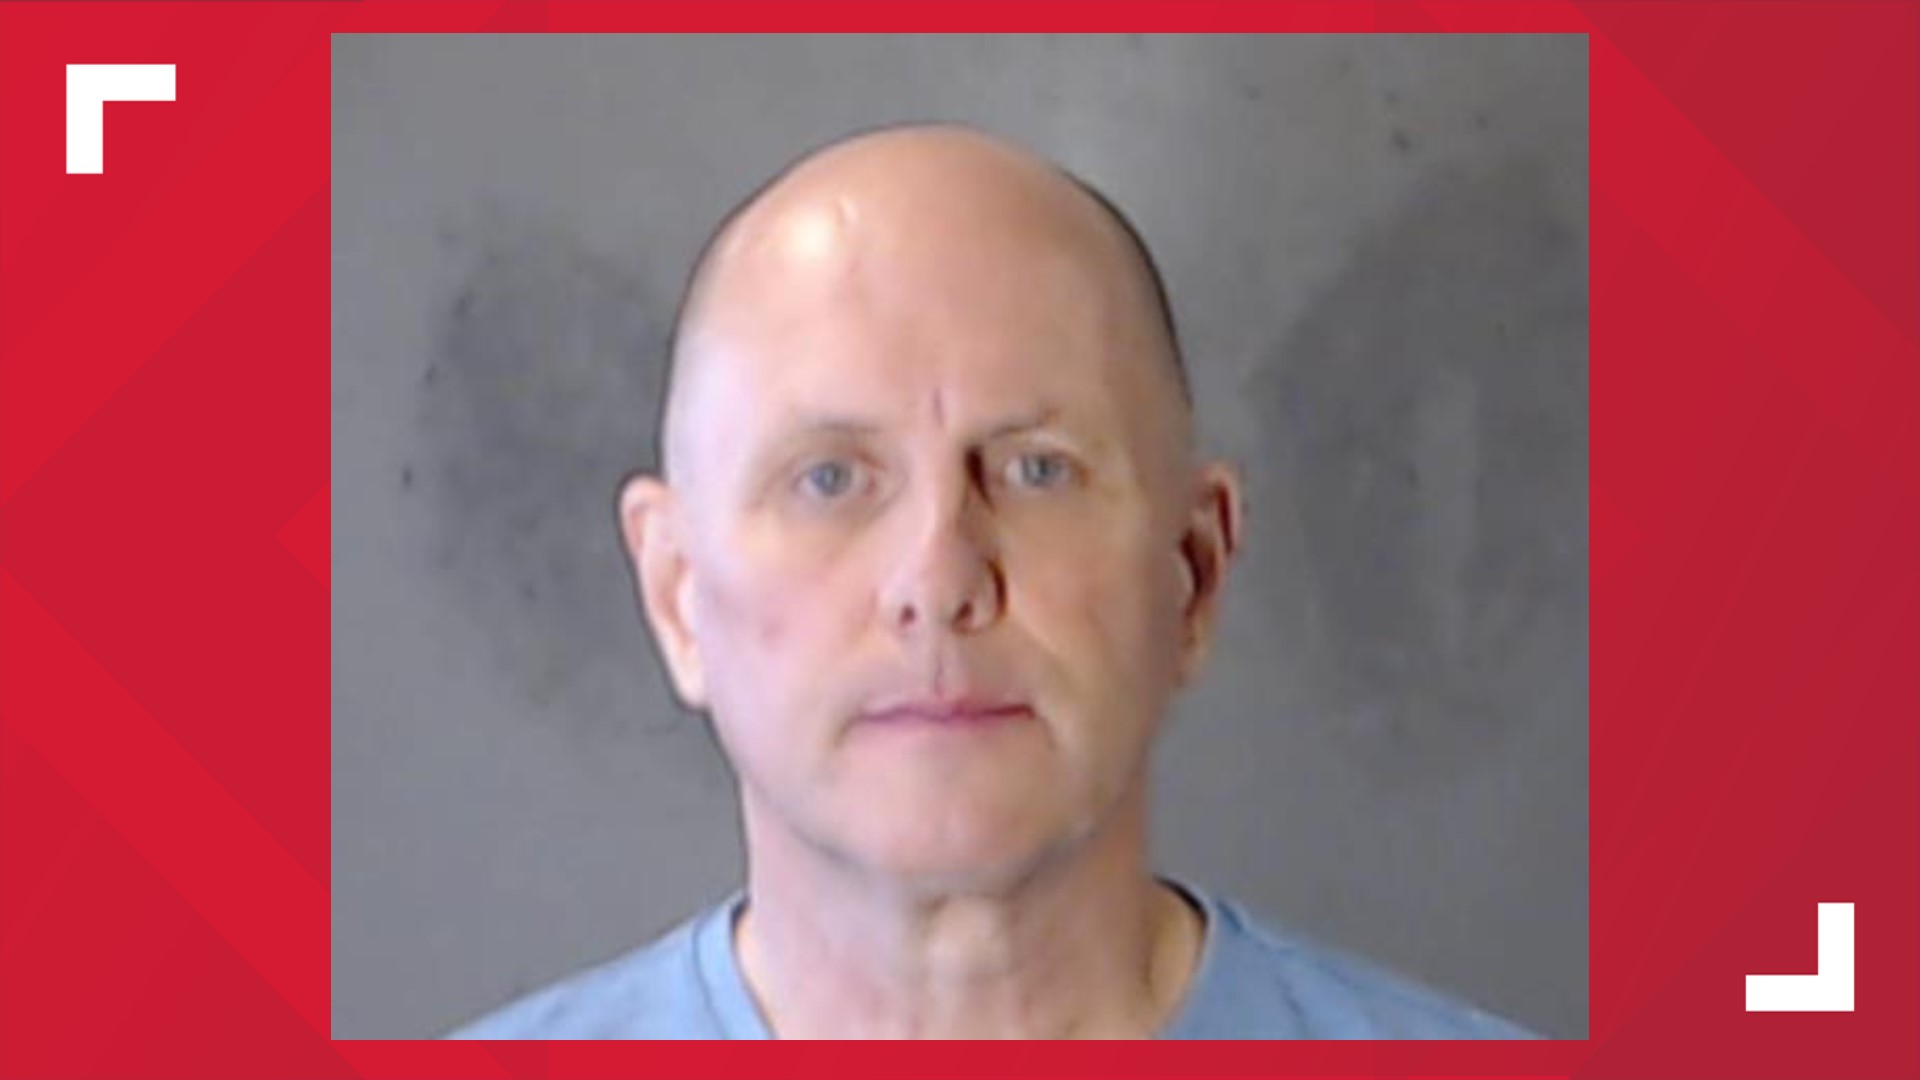 A man accused of violently raping women in the Sacramento area in the early 90s is now behind bars. Mark Jeffery Manteuffel was arrested for a string of violent rapes in the Sacramento area, dating back more than 25 years.